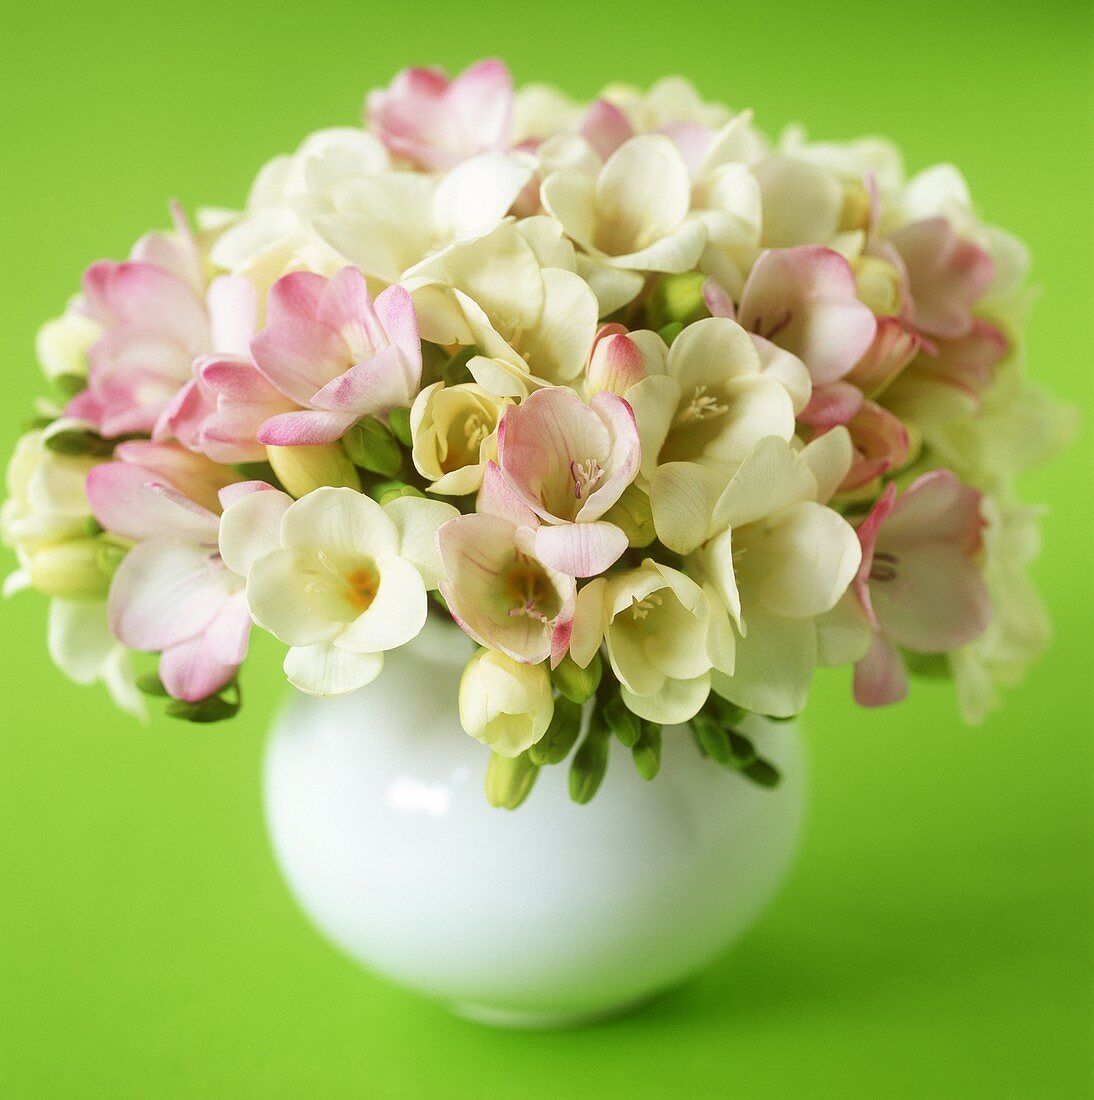 White and pastel-coloured freesias in a spherical vase